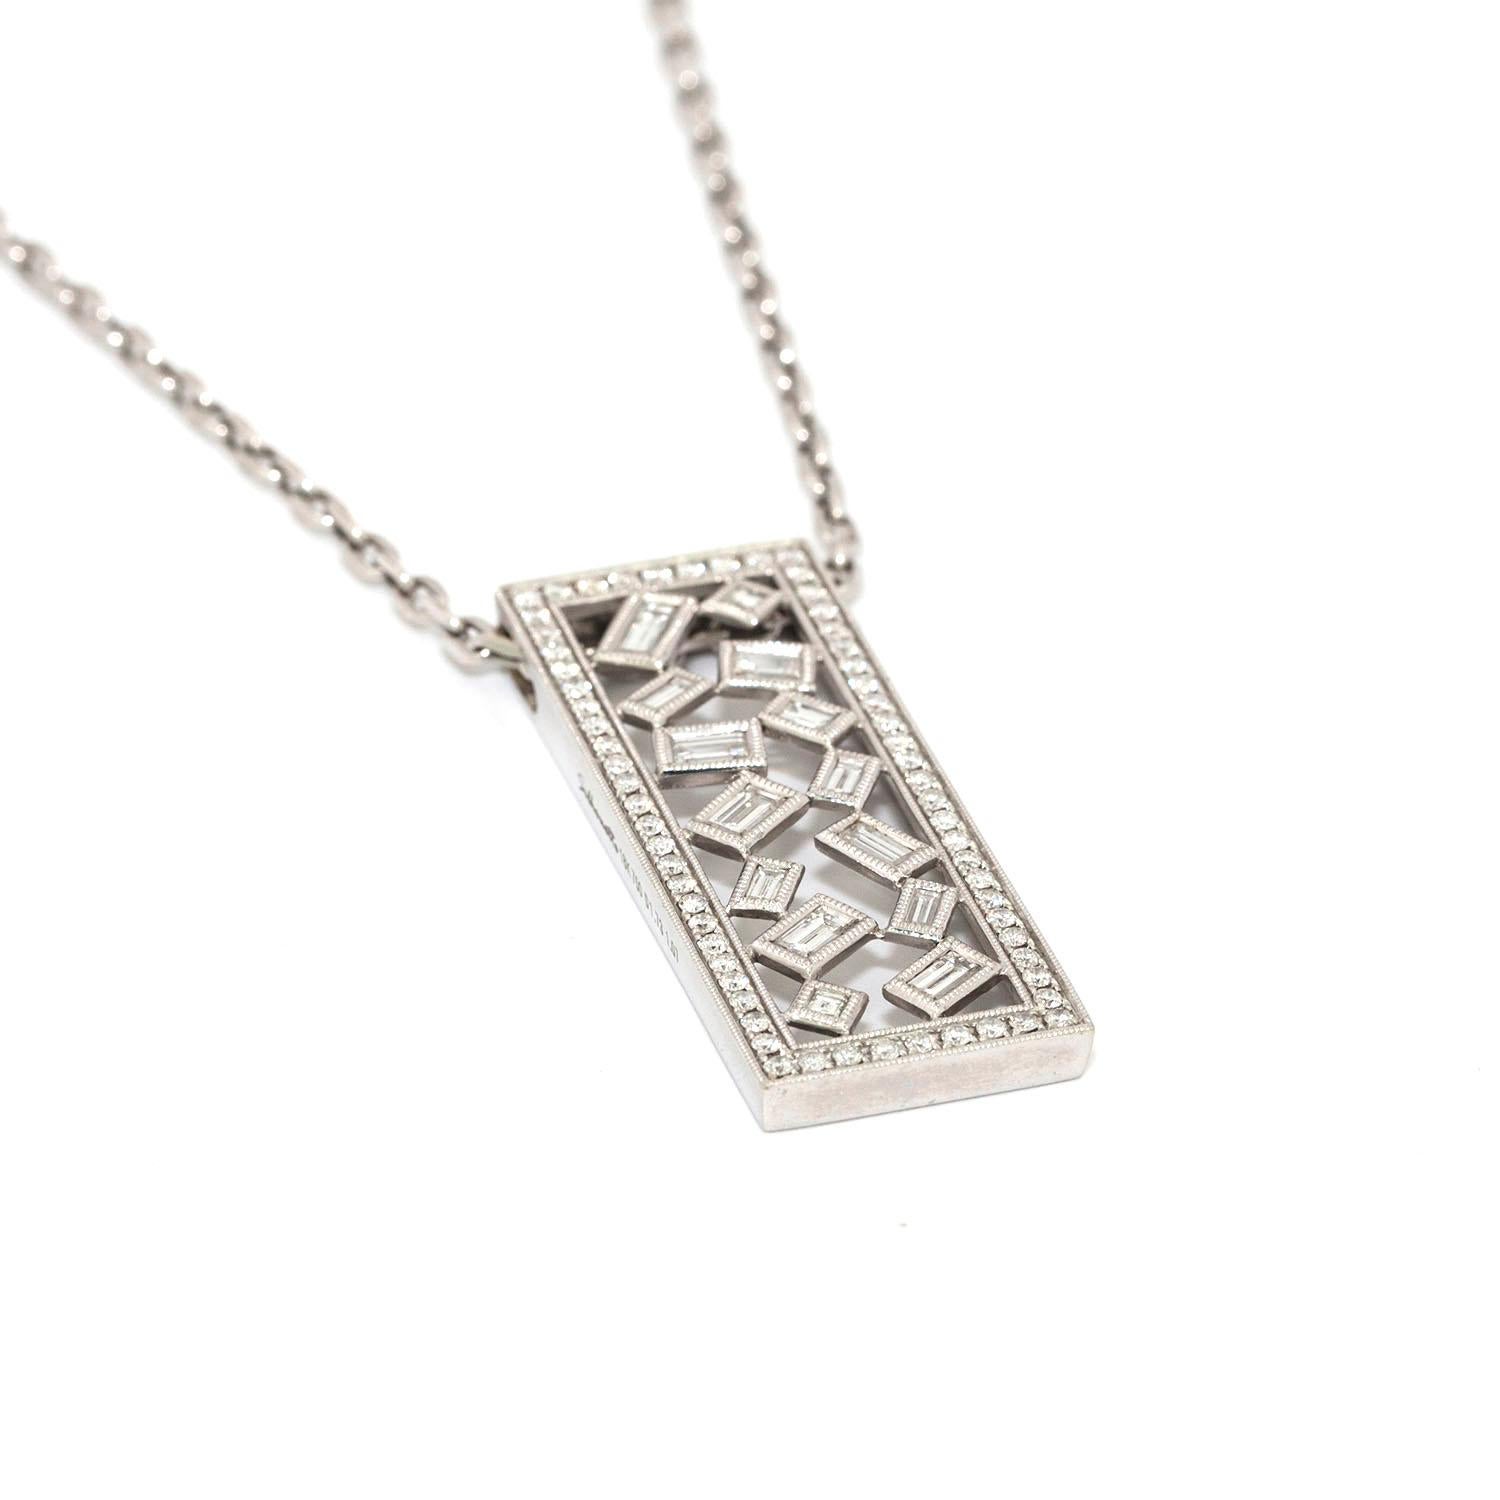 This unique pendant playfully displays 14 white emerald cut diamonds, with a total weight of over 1.70 carats.
the pendant is also set with 64 round white diamonds with total weight of over 1 carat.
4.5x1.70cm pendant measurements
stamp: silhouette